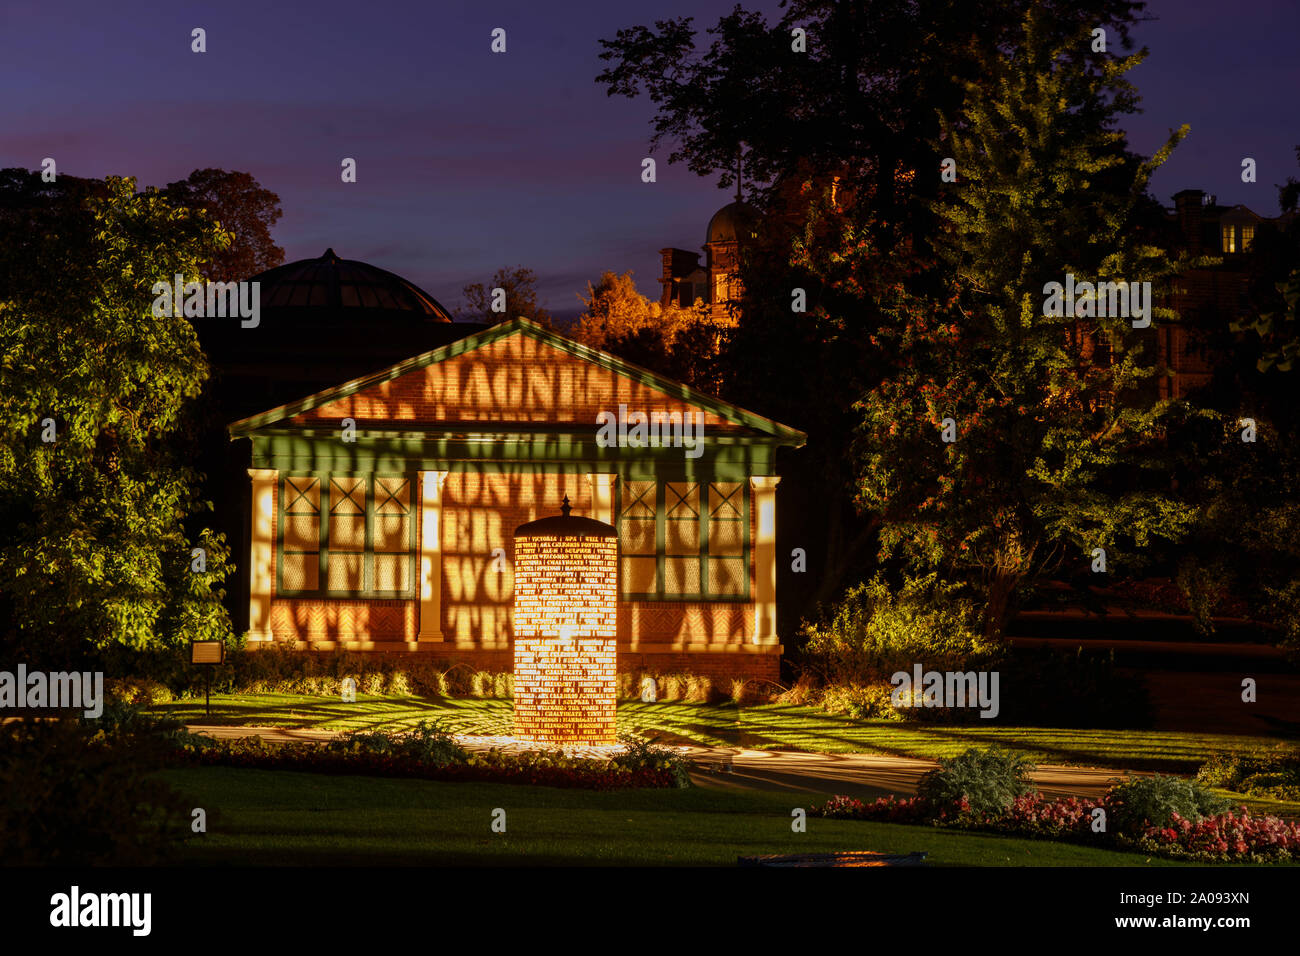 New light installation made from steel with the names of spring wells illuminating a bandstand in The Valley Gardens, Harrogate, England, UK. Stock Photo